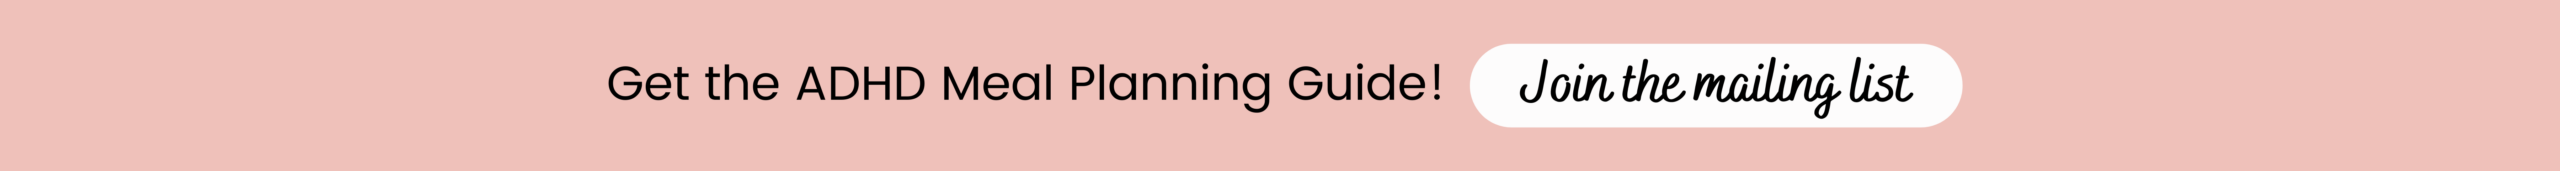 Button that reads: Get the ADHD Meal Planning Guide! Join the mailing list.